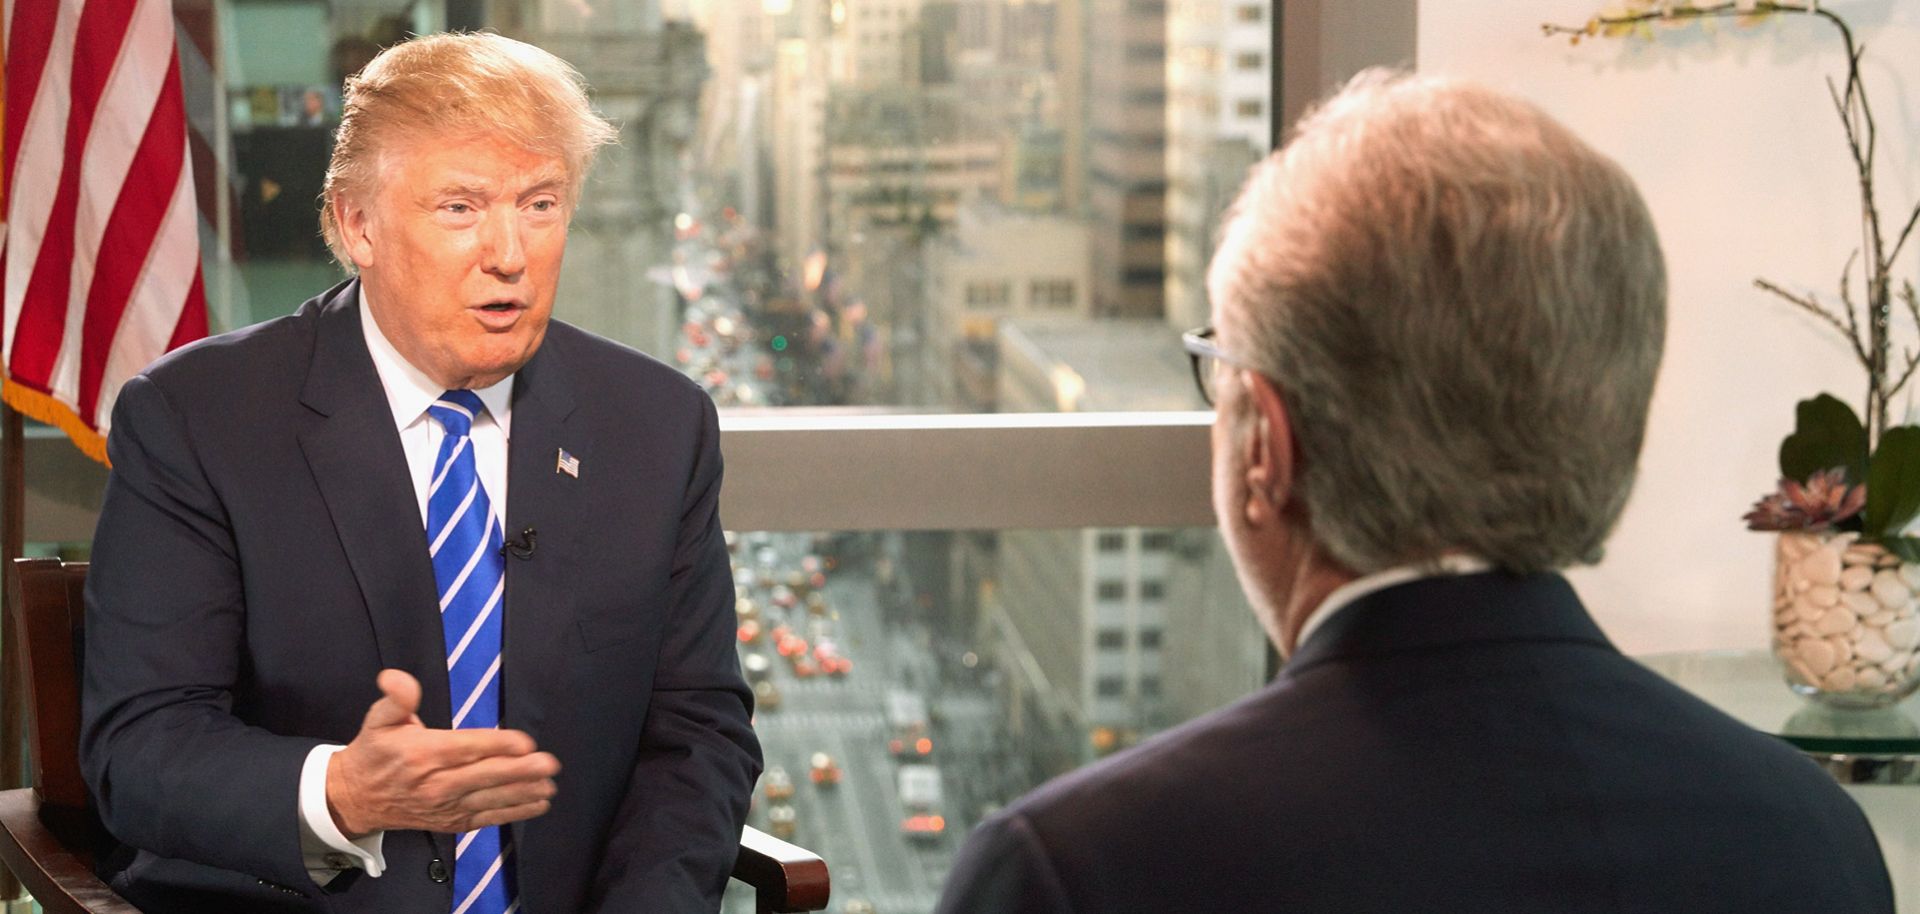 Republican Presidential Candidate Donald Trump interviewed by journalist Wolf Blitzer for The Situation Room on CNN on January 6, 2016 in New York City.